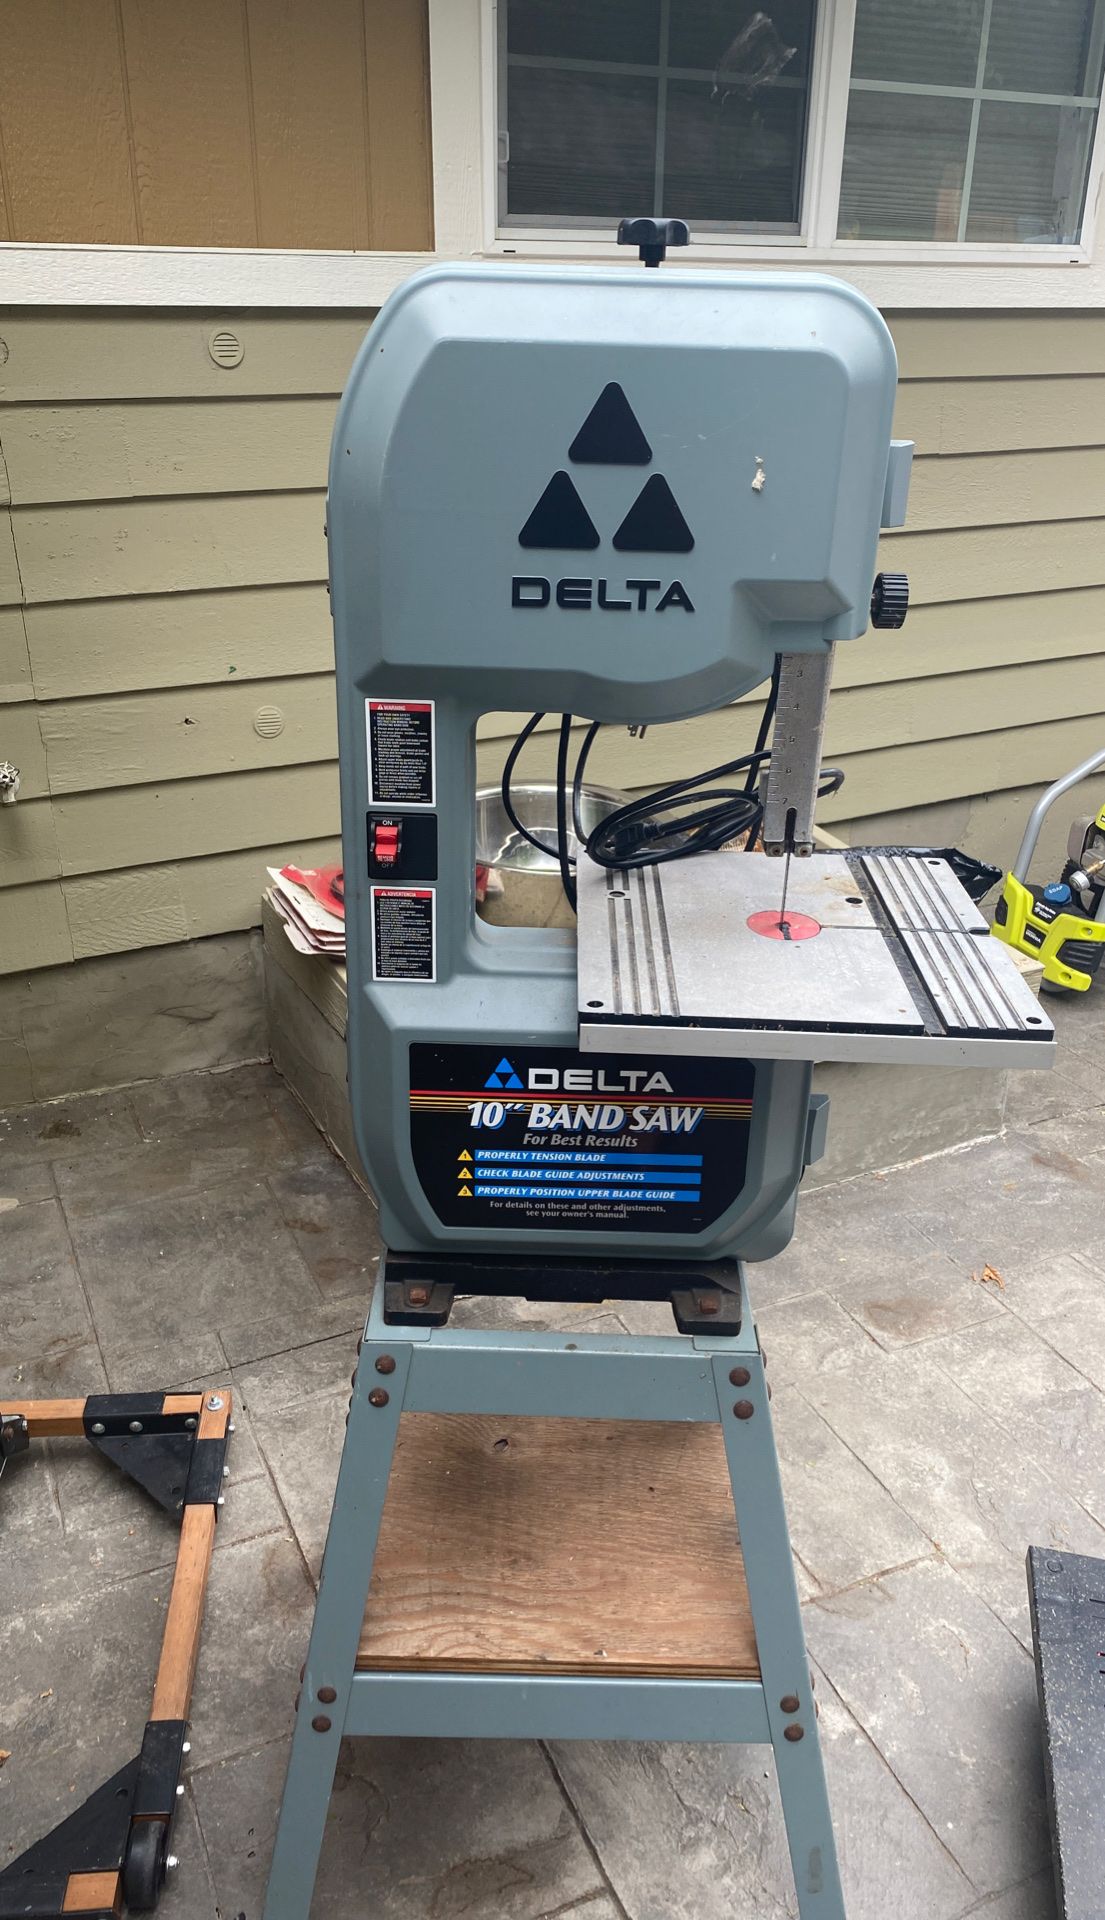 Delta Band Saw 10” with accessories and shop master